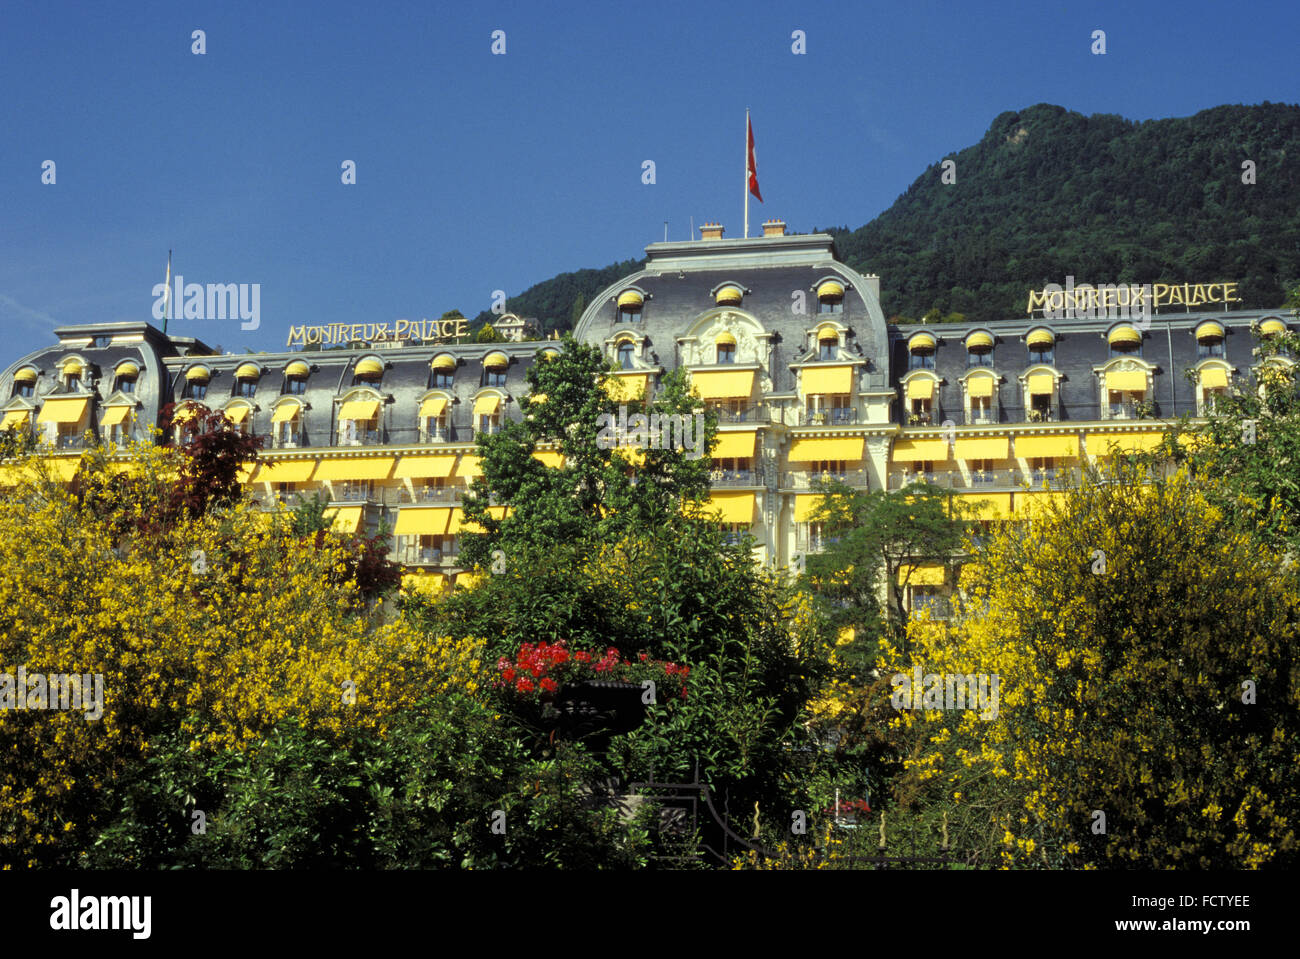 CHE, Schweiz, Montreux am Genfer See, Montreux Palace Hotel.   CHE, Schweiz, Montreux am Genfer See, Montreux Palace Hotel. Stockfoto